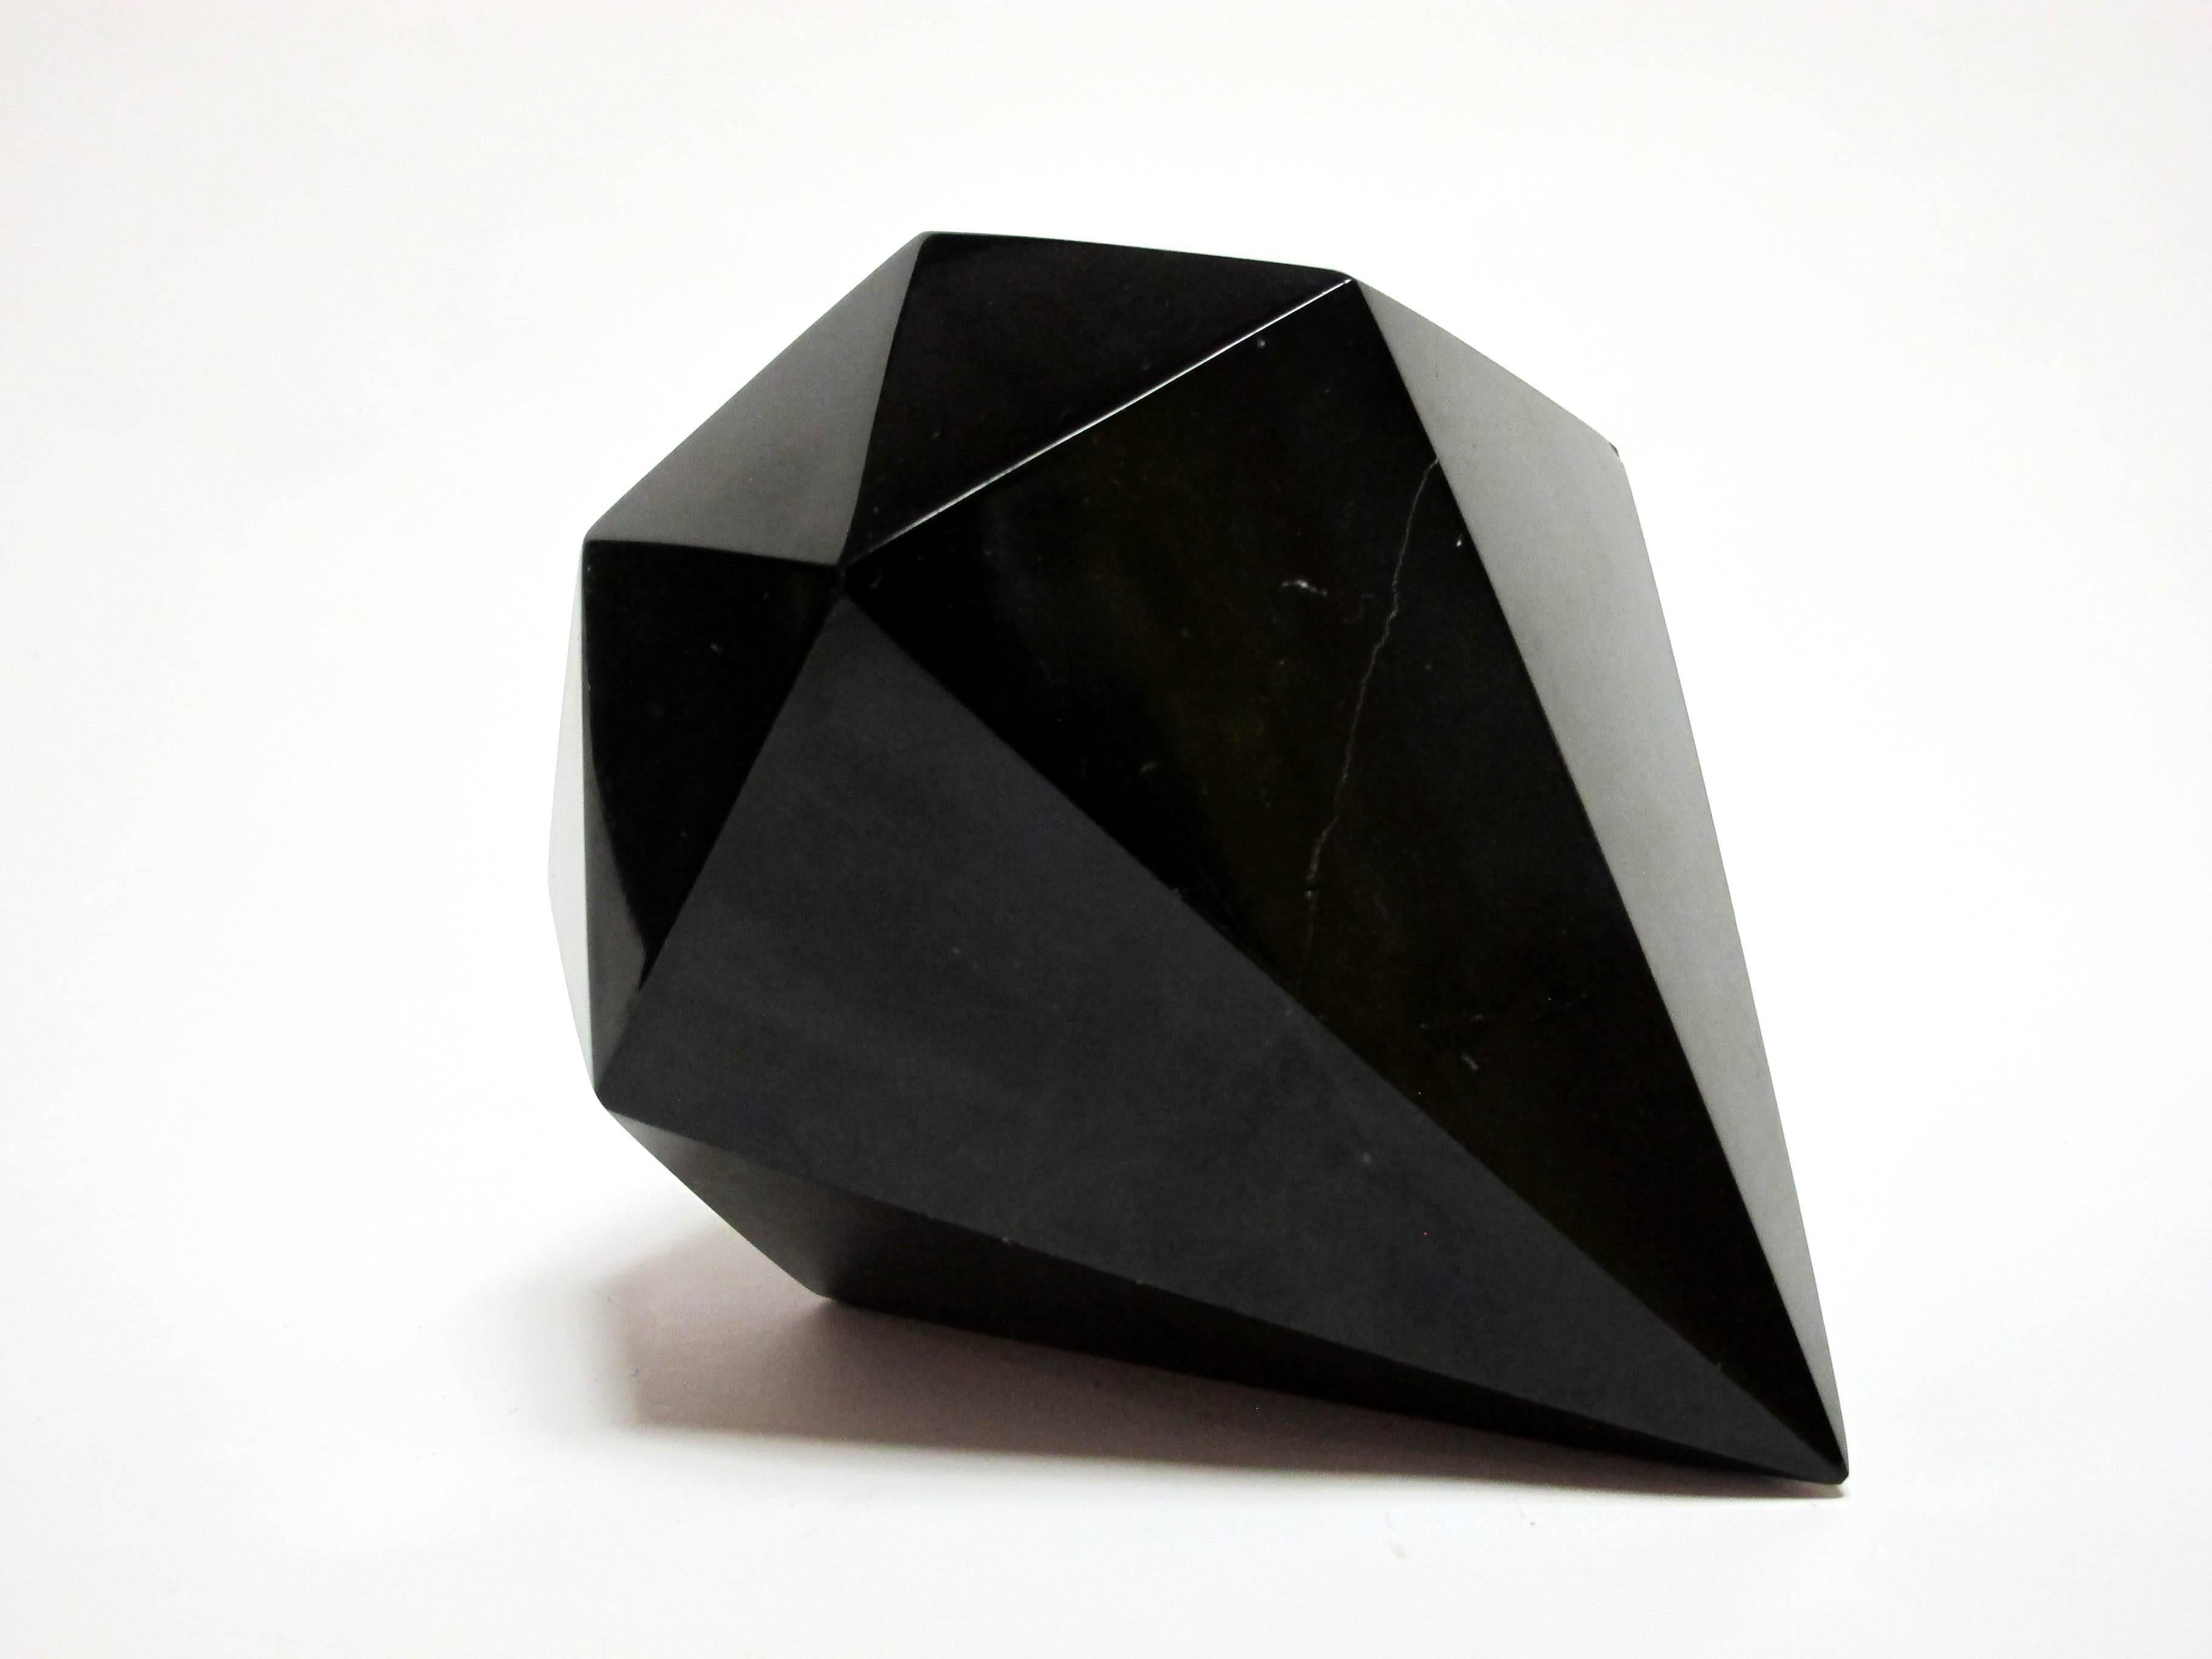 This is a gorgeous hand-carved black marble object. The marble is polished and has an amazing tactile feeling. 

This piece is celebrates our connection to everyday objects and reminds us of the importance of our tactile senses that nowadays are